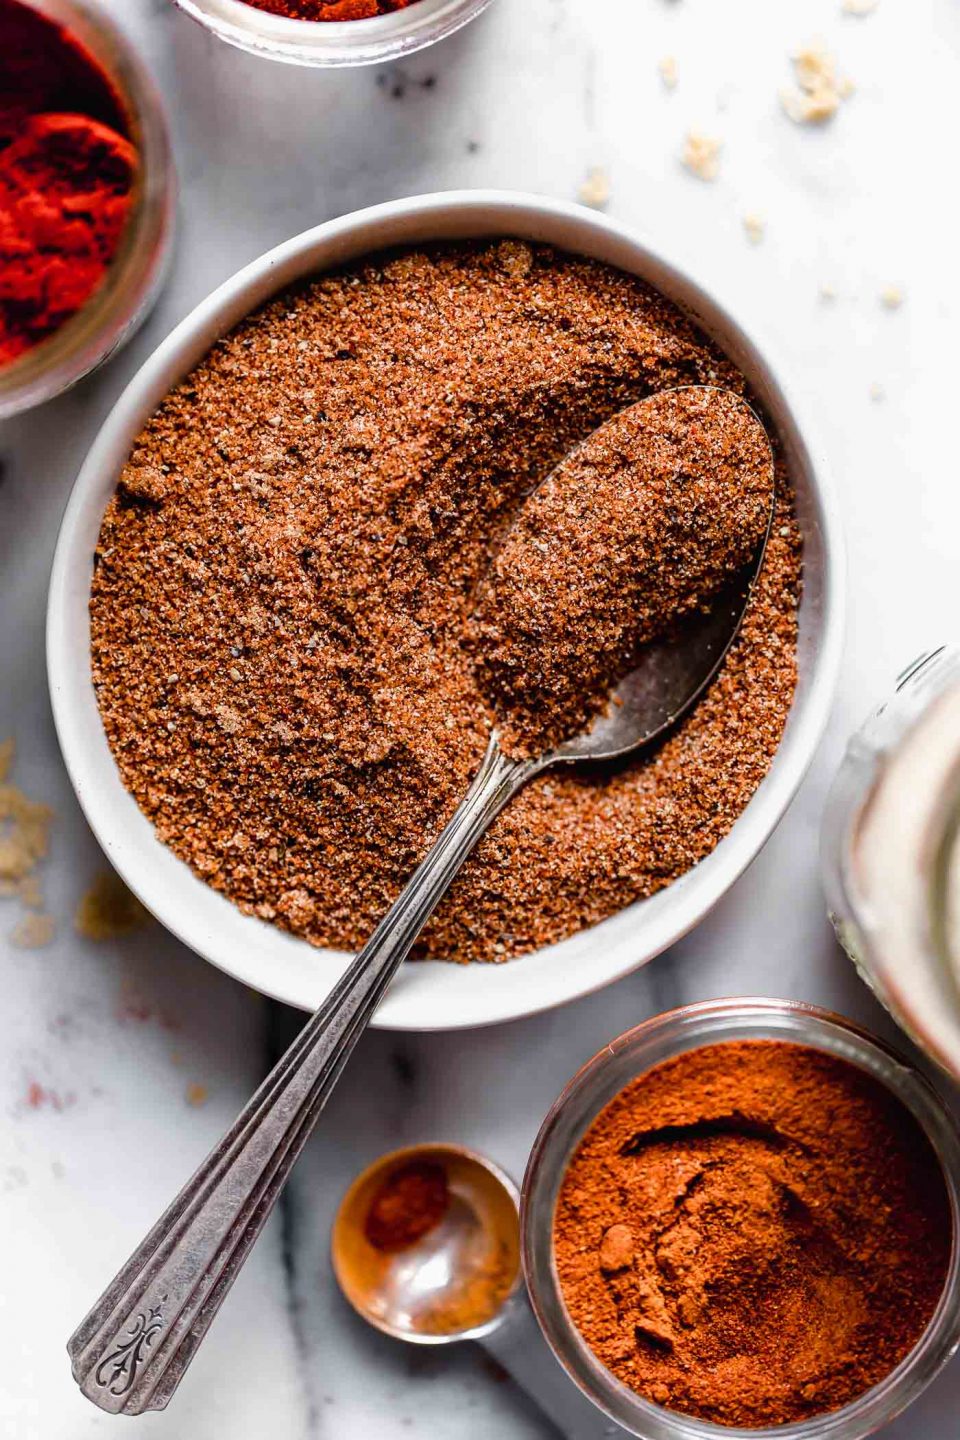 Mixed dry rub for baby back ribs shown in a small white bowl with a patina spoon. The dry rub bowl is shown on a marble surface, next to a small measuring spoon & some larger jars of spices.